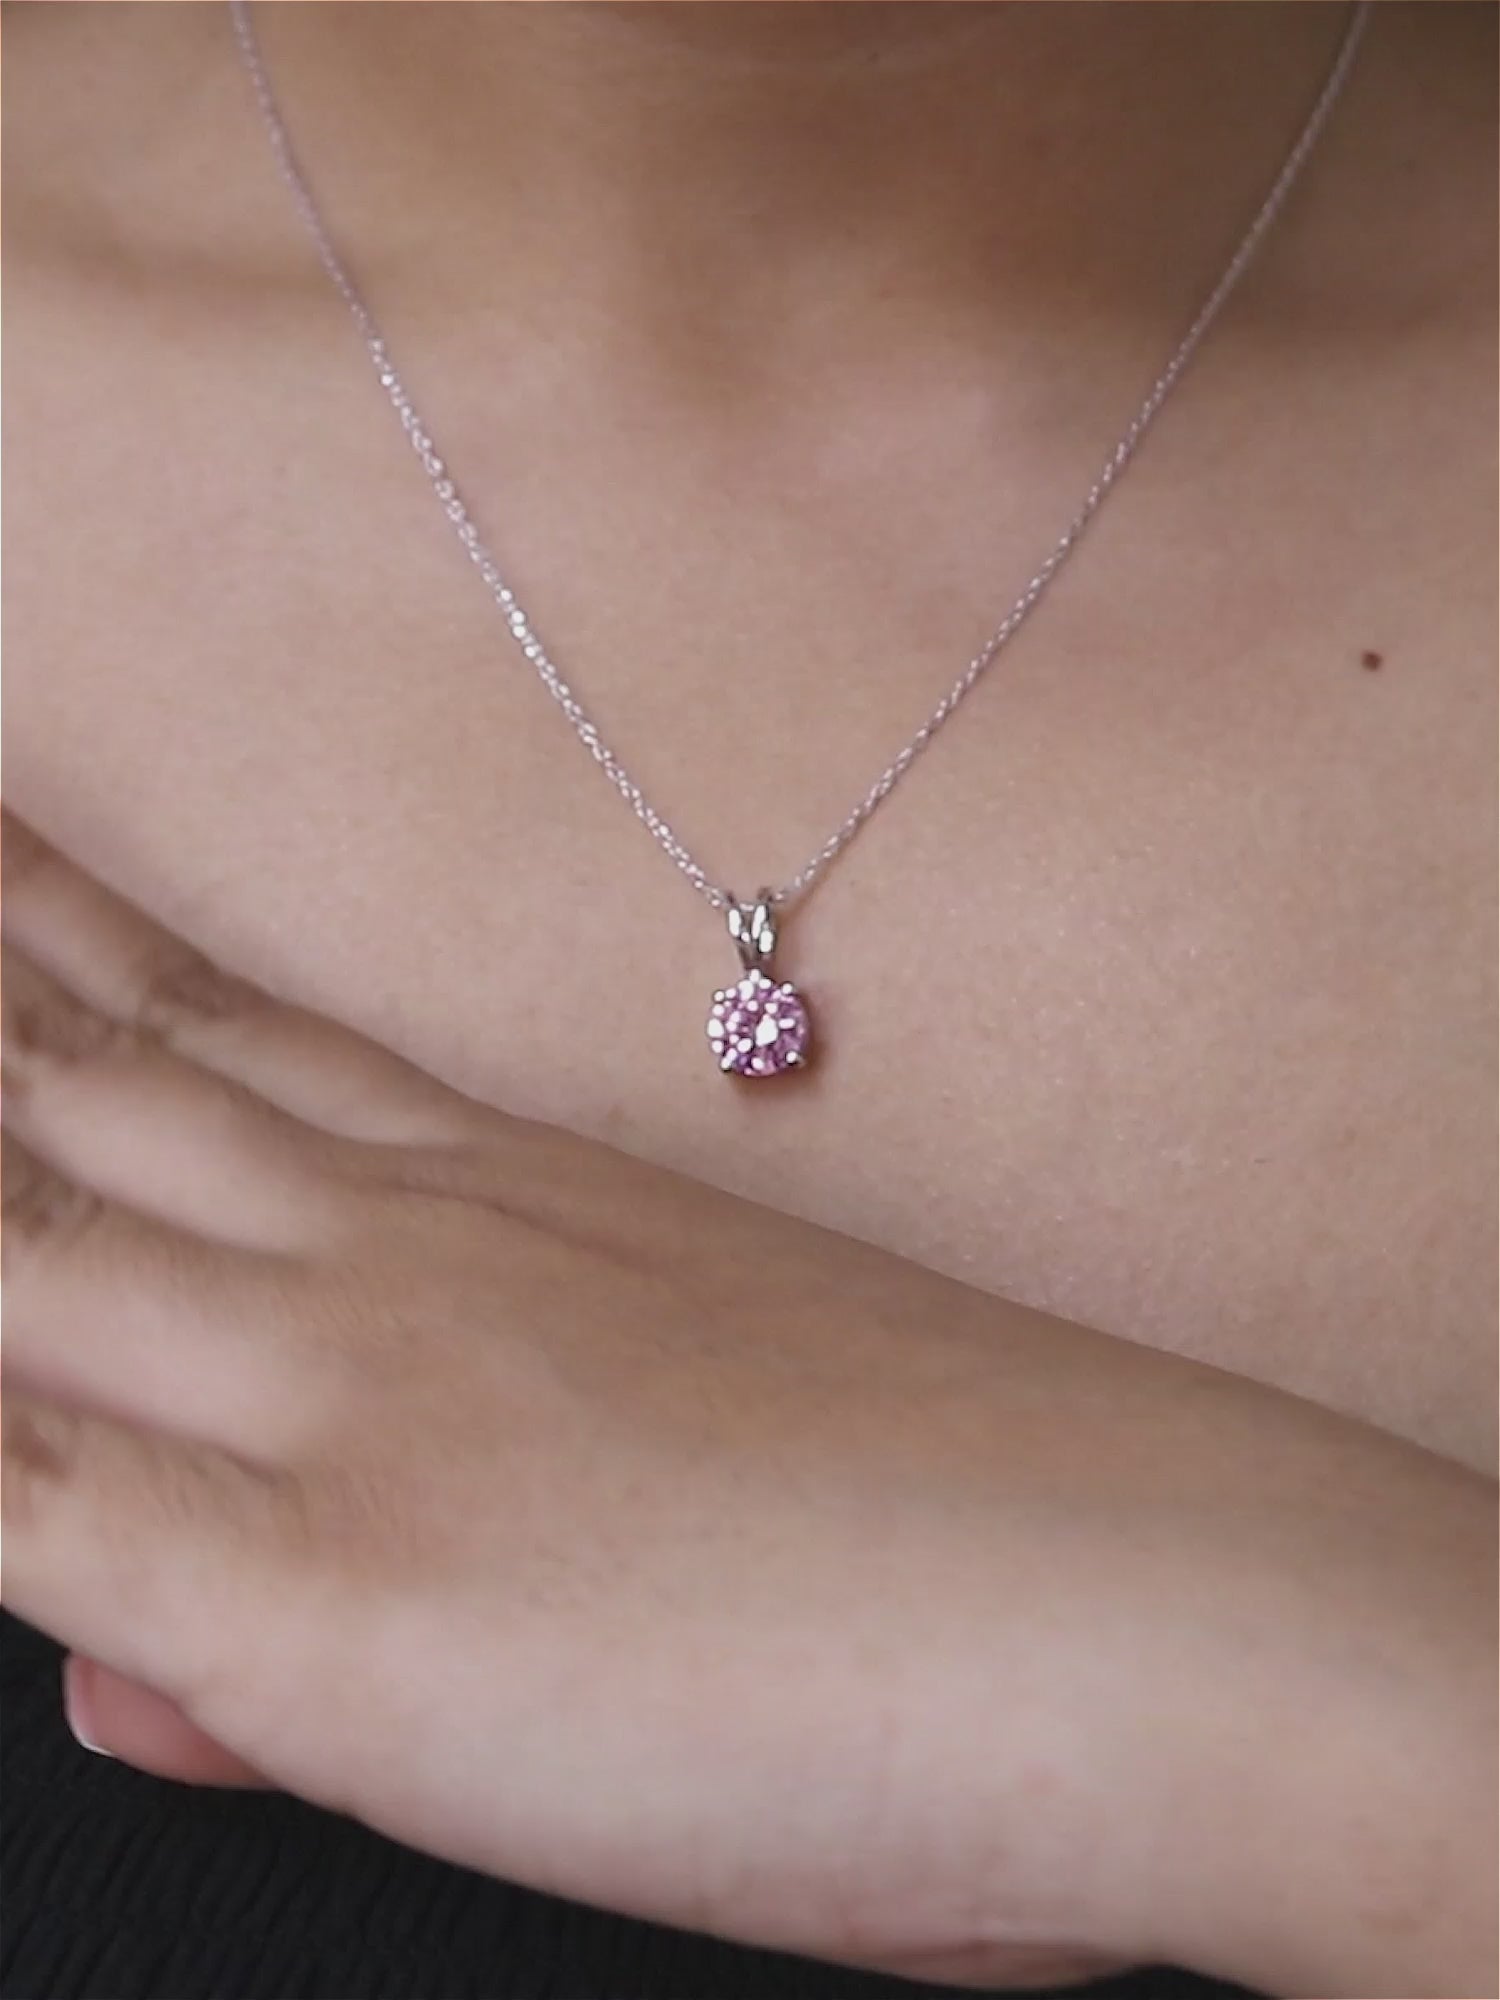 PINK SOLITAIRE PENDANT WITH CHAIN